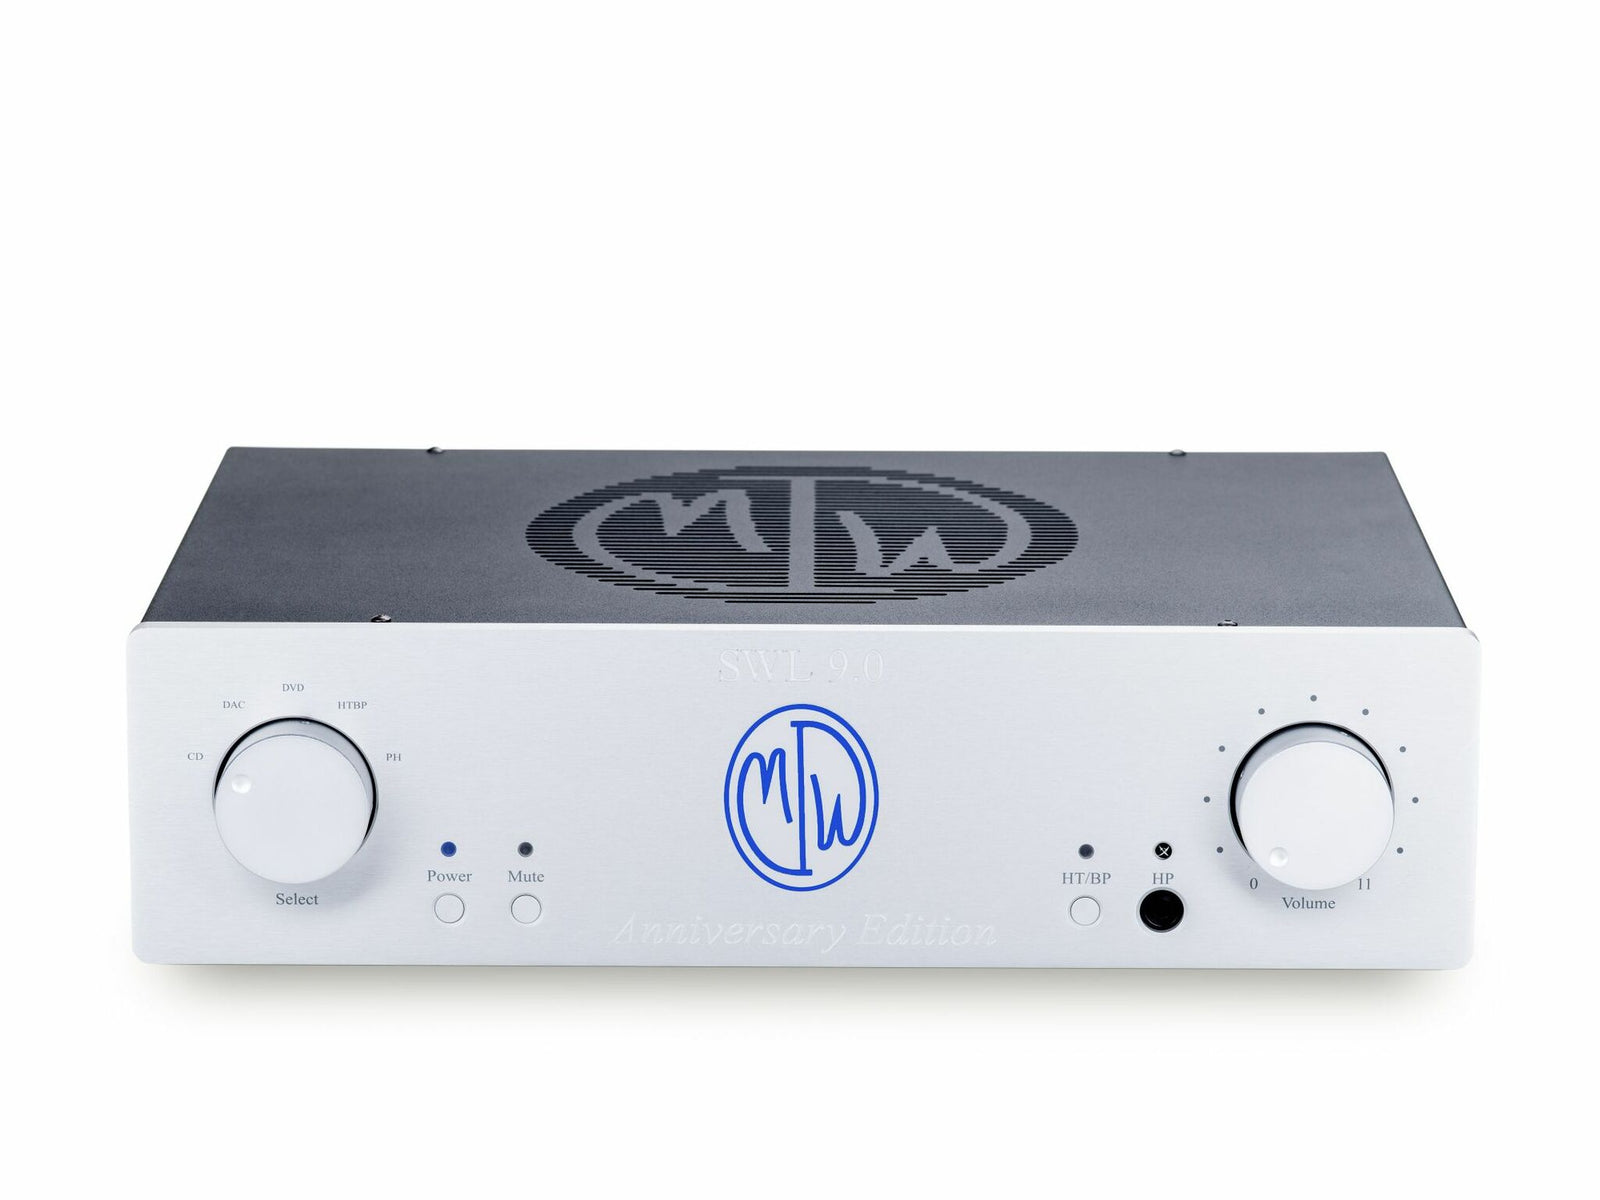 Best deals on ModWright Amplifiers, tube amplifiers, phono stages, headphone amplifiers, integrated amplifier, Pre-Amplifiers, and Tube Modifications at vinylsound.ca Modwright SWL 9.0 ANNIVERSARY EDITION PHONO PREAMPLIFIER - Modwright LS 100 TUBE PREAMPLIFIER - MODWRIGHT LS 36.5 - KWA 150 SE SOLID STATE POWER AMPLIFIER SIGNATURE EDITION - KWH 225i HYBRID INTEGRATED AMPLIFIER - MODWRIGHT PH 150 REFERENCE TUBE PHONO STAGE 